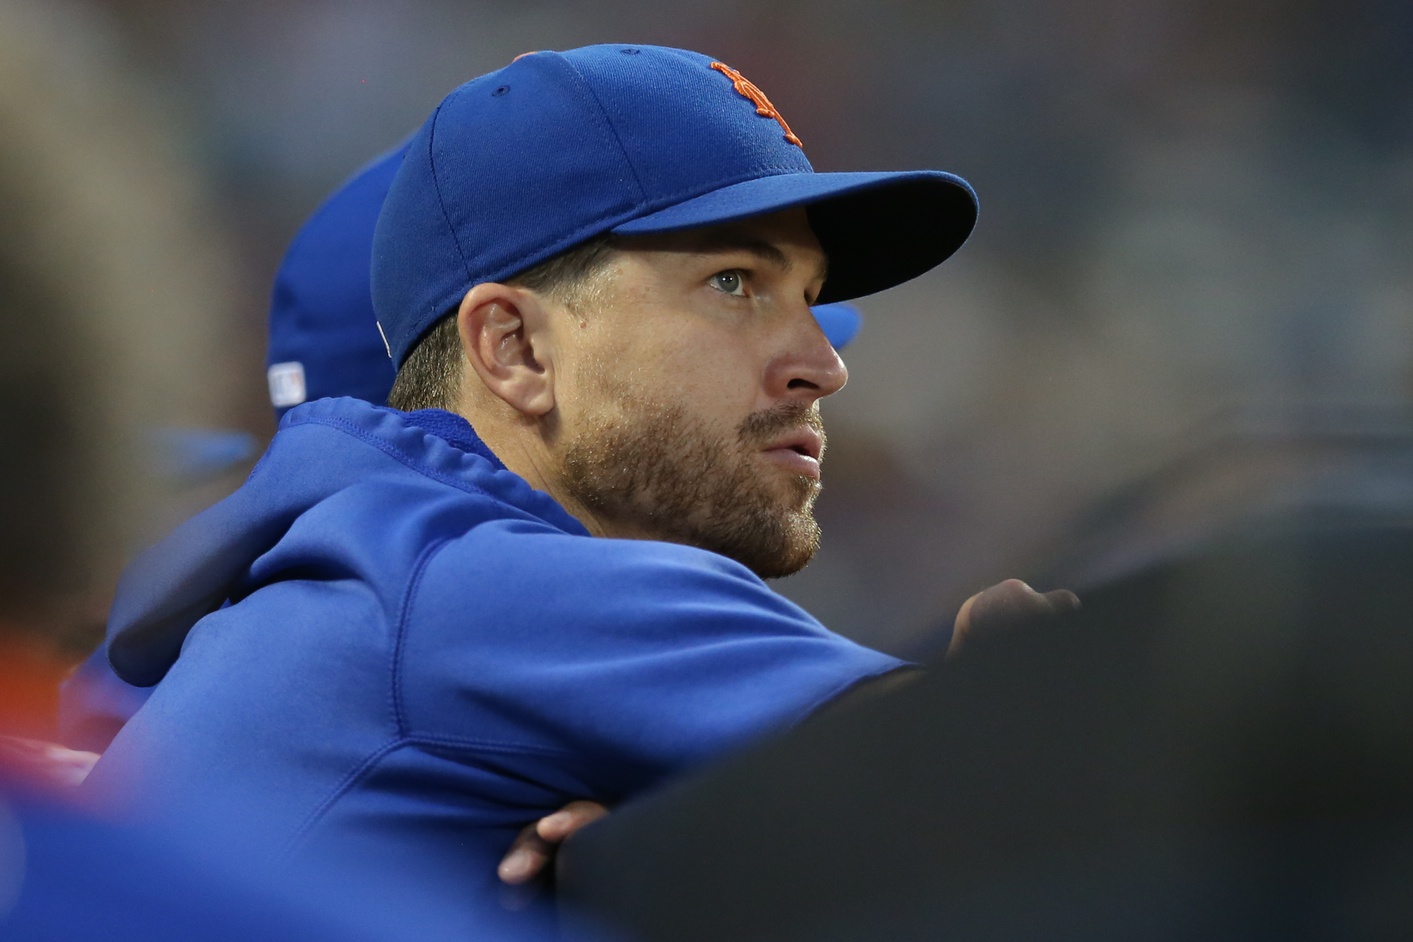 New York Mets ace Jacob deGrom likely to be shut down for rest of 2021